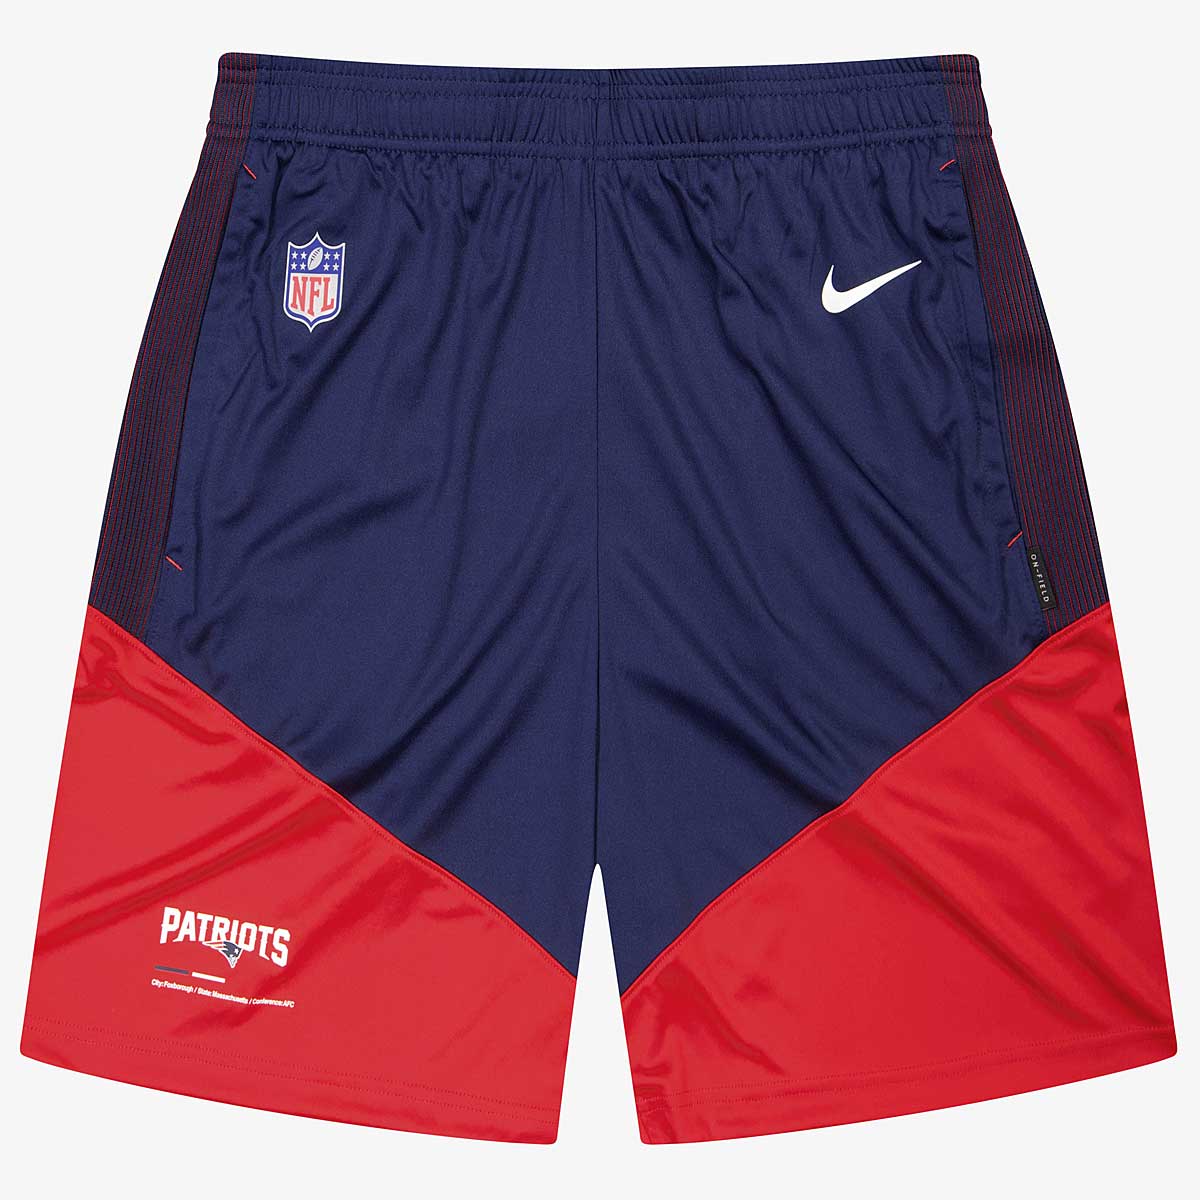 Nike Nfl New England Patriots Dri-Fit Knit Shorts, College Navy-University Red-College Navy New Engl